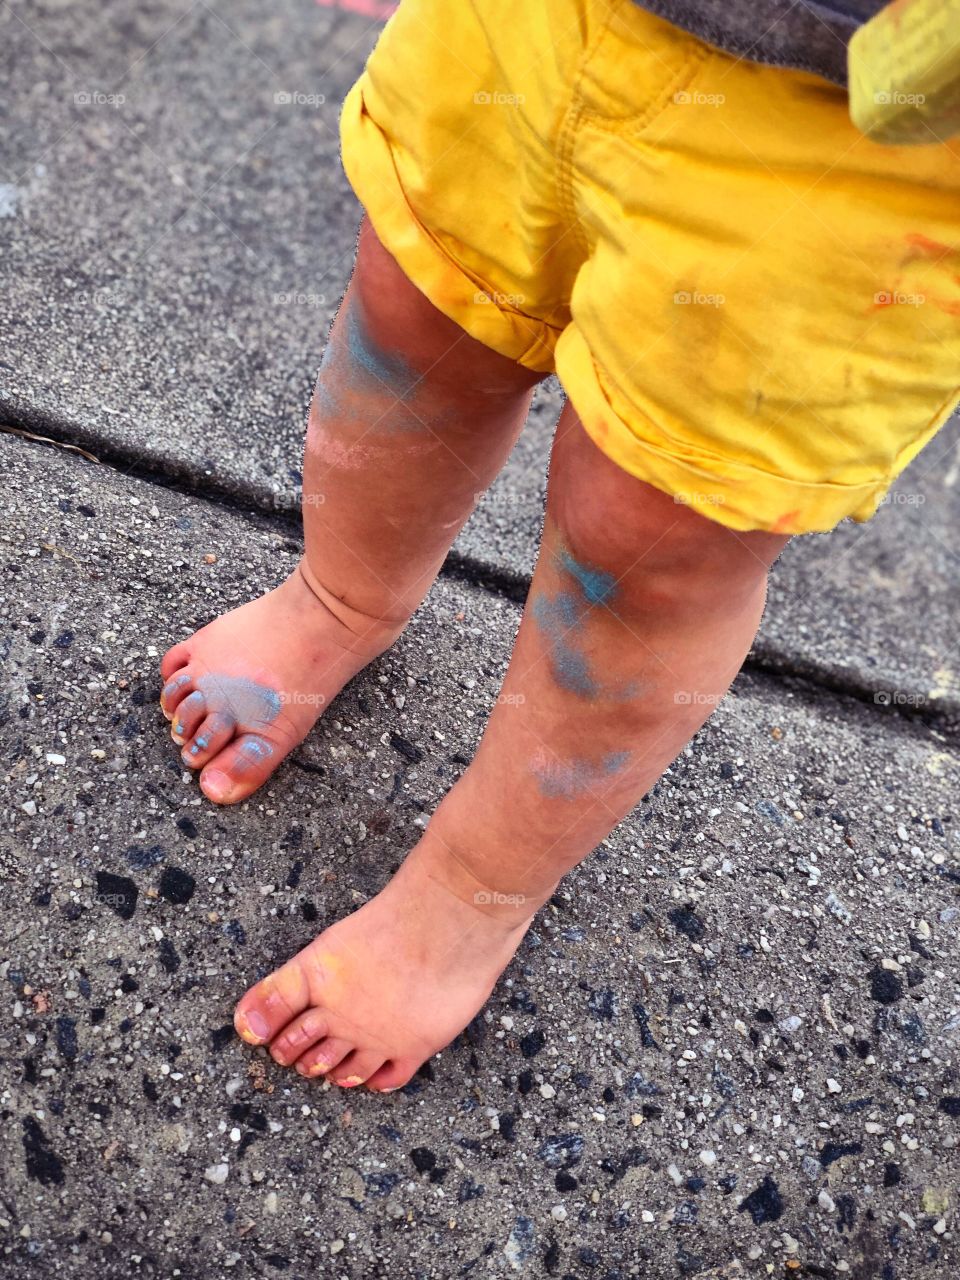 Toddlers feet, dirty with sidewalk chalk while coloring the driveway outside.